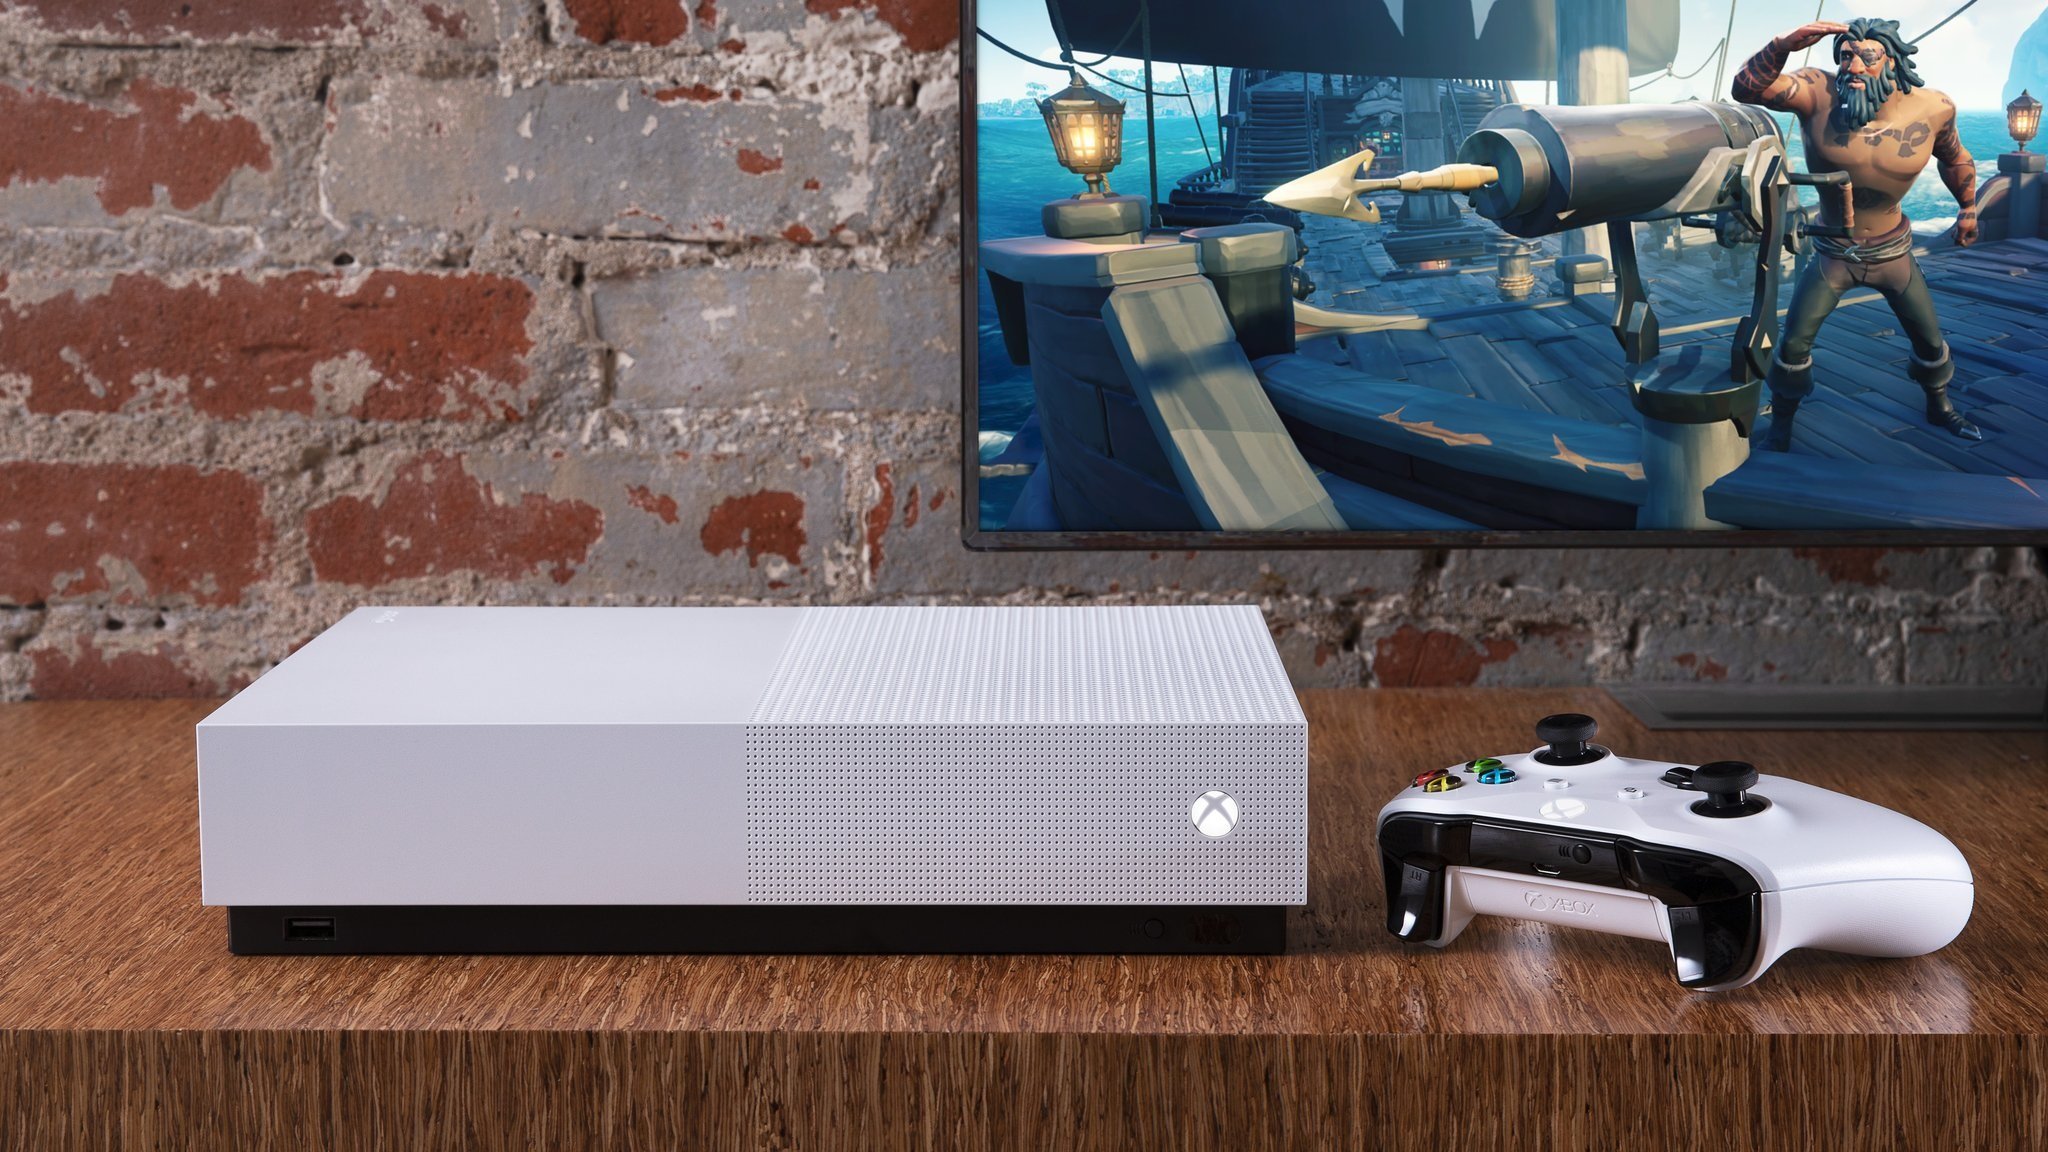 Microsoft has confirmed it’s no longer developing games for Xbox One | VGC